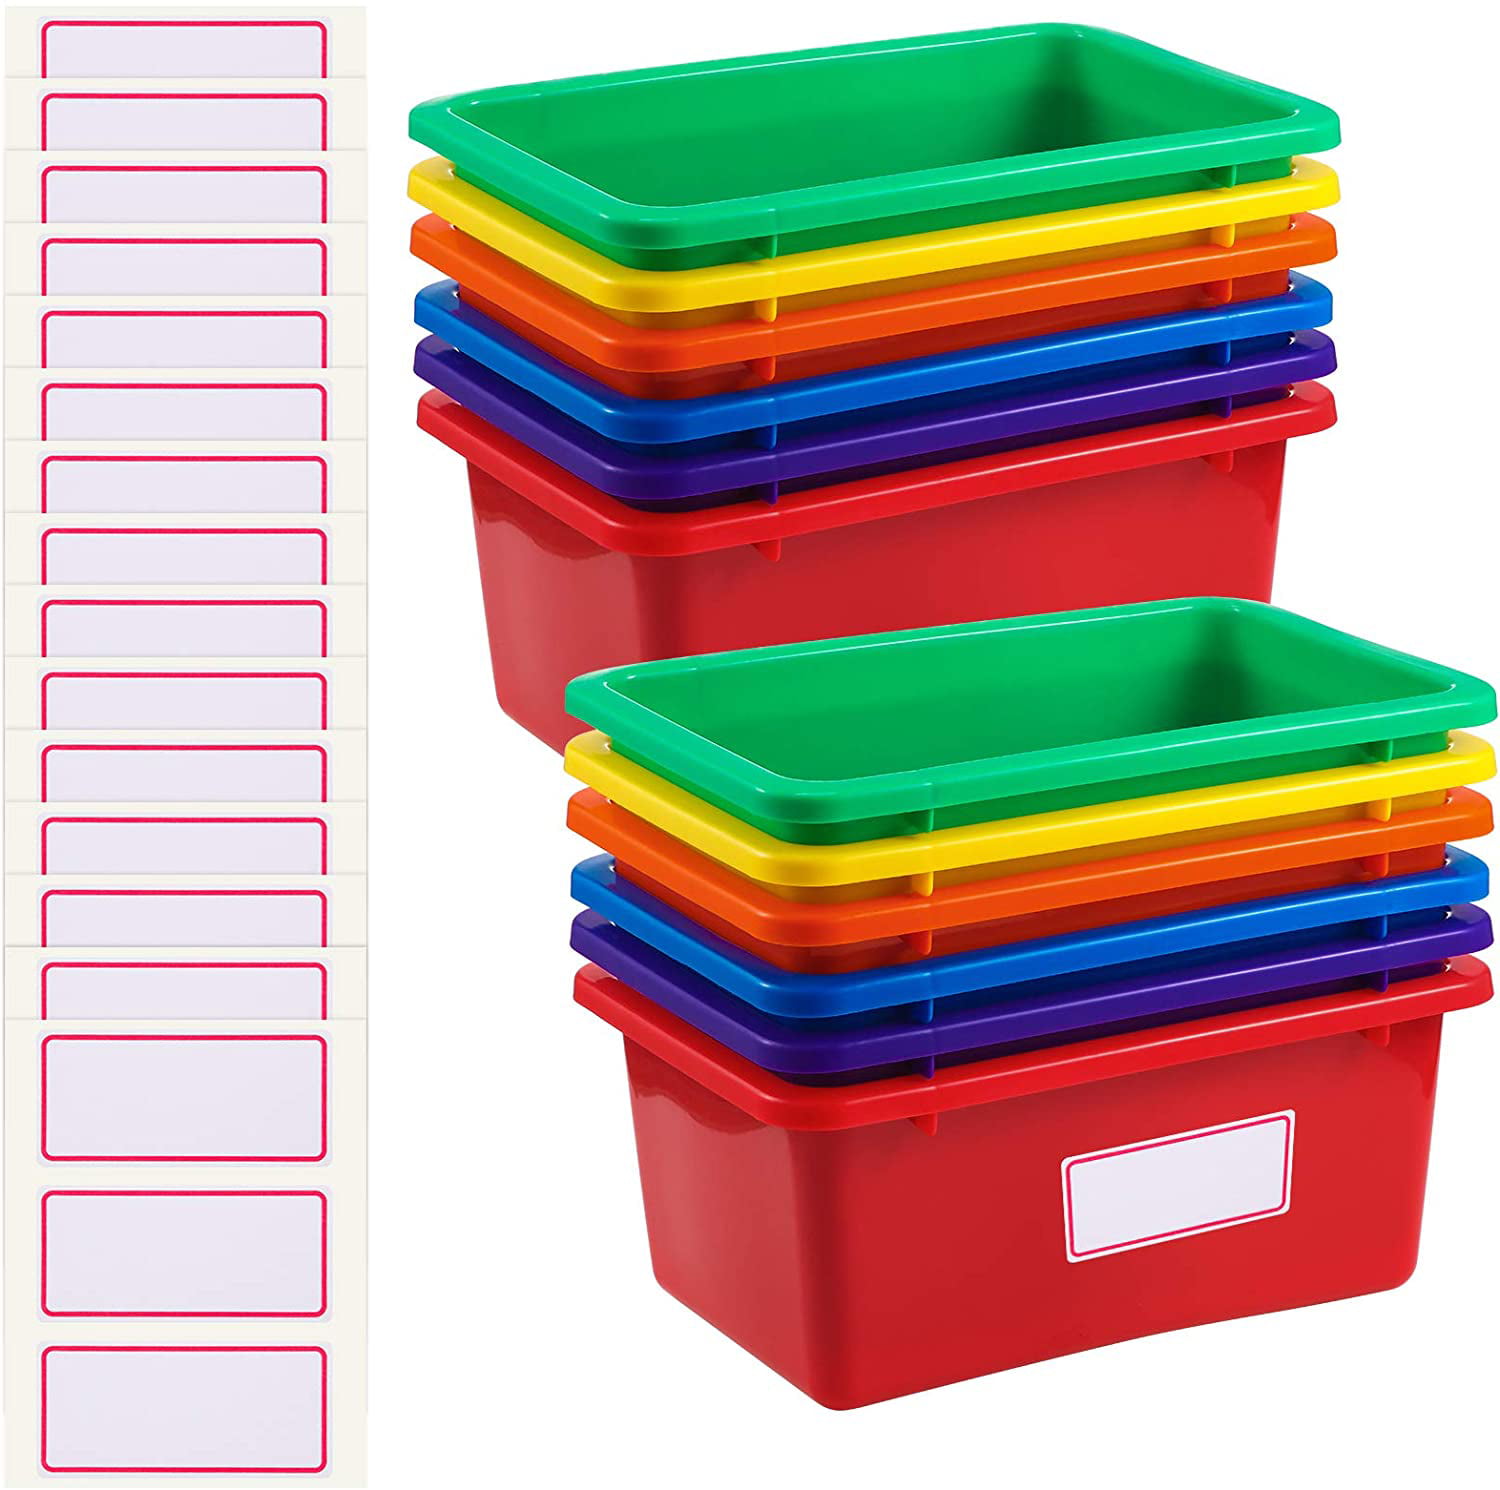 Colorful Classroom Office Desktop Organization Trays School Supplies Storage Container Tray for Pencil Crayon Books Paper File Kids Students Teachers 12 Pcs Classroom Plastic Drawer Bins in 2 Sizes 